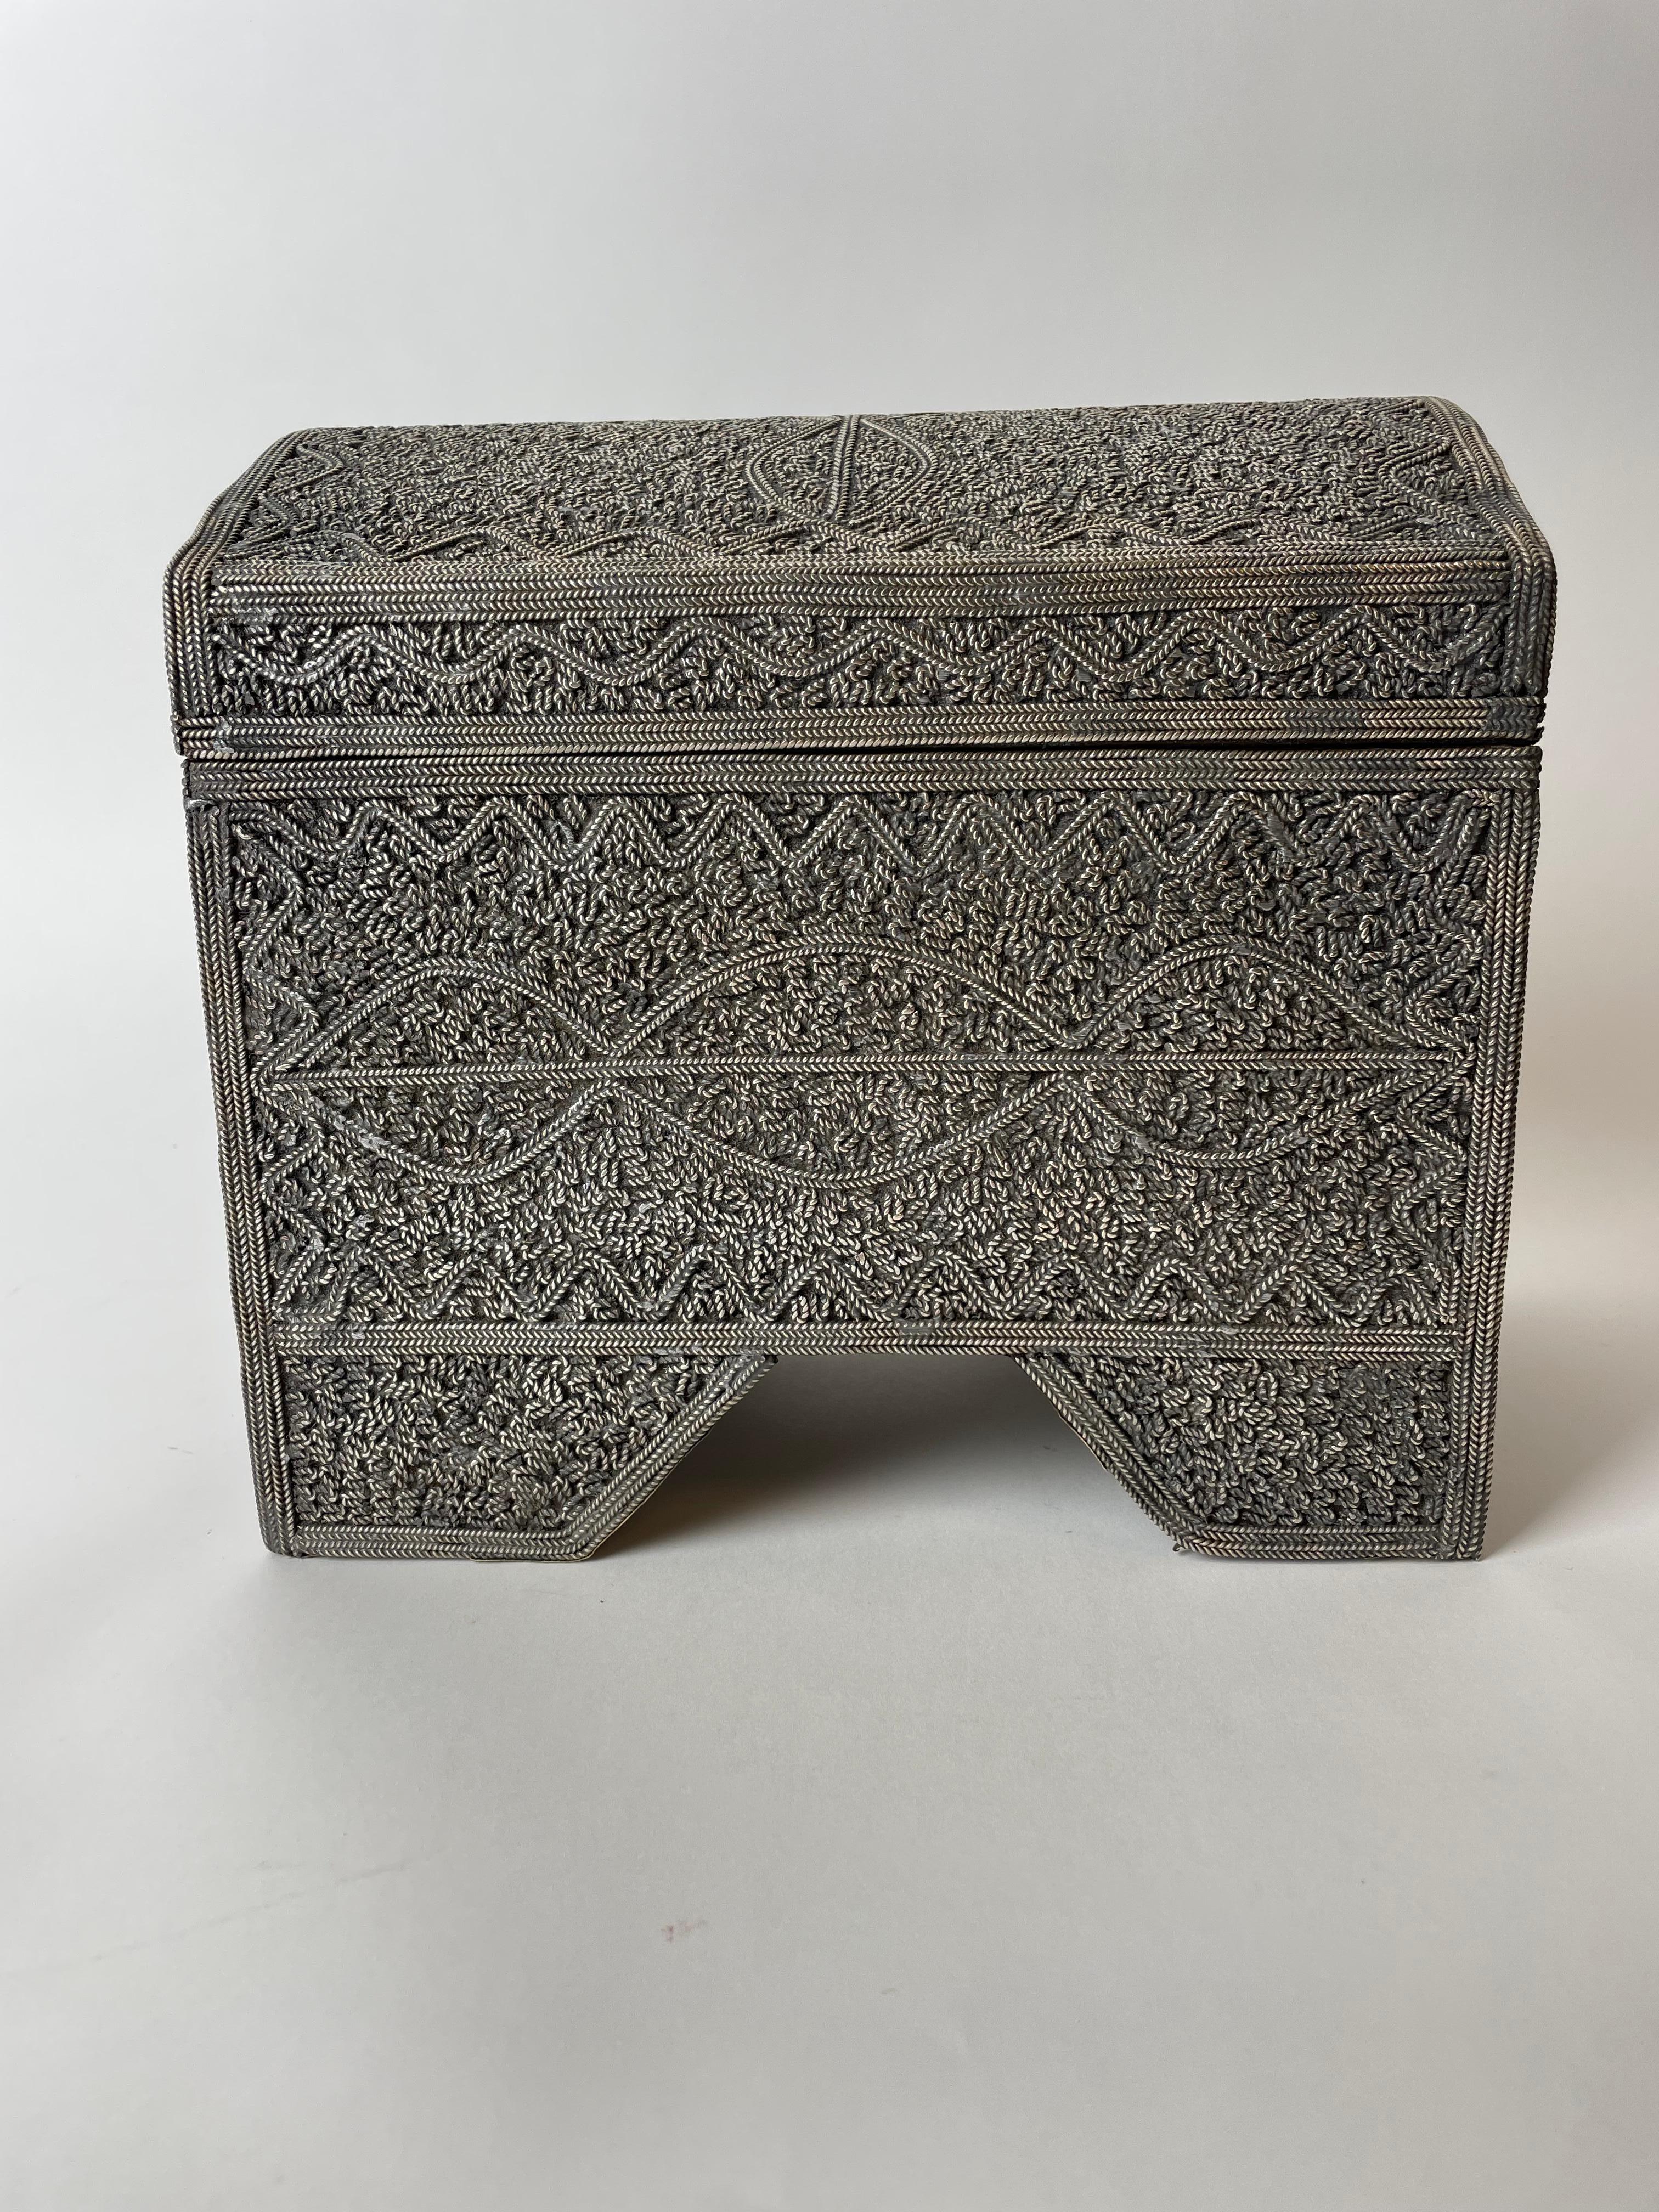 Beautiful North African Box richly decorated with silver wire, very exquisite craftmanship. Probably made in Marocco or Algeria during the late 19th century.

Wear consistent with age and use.